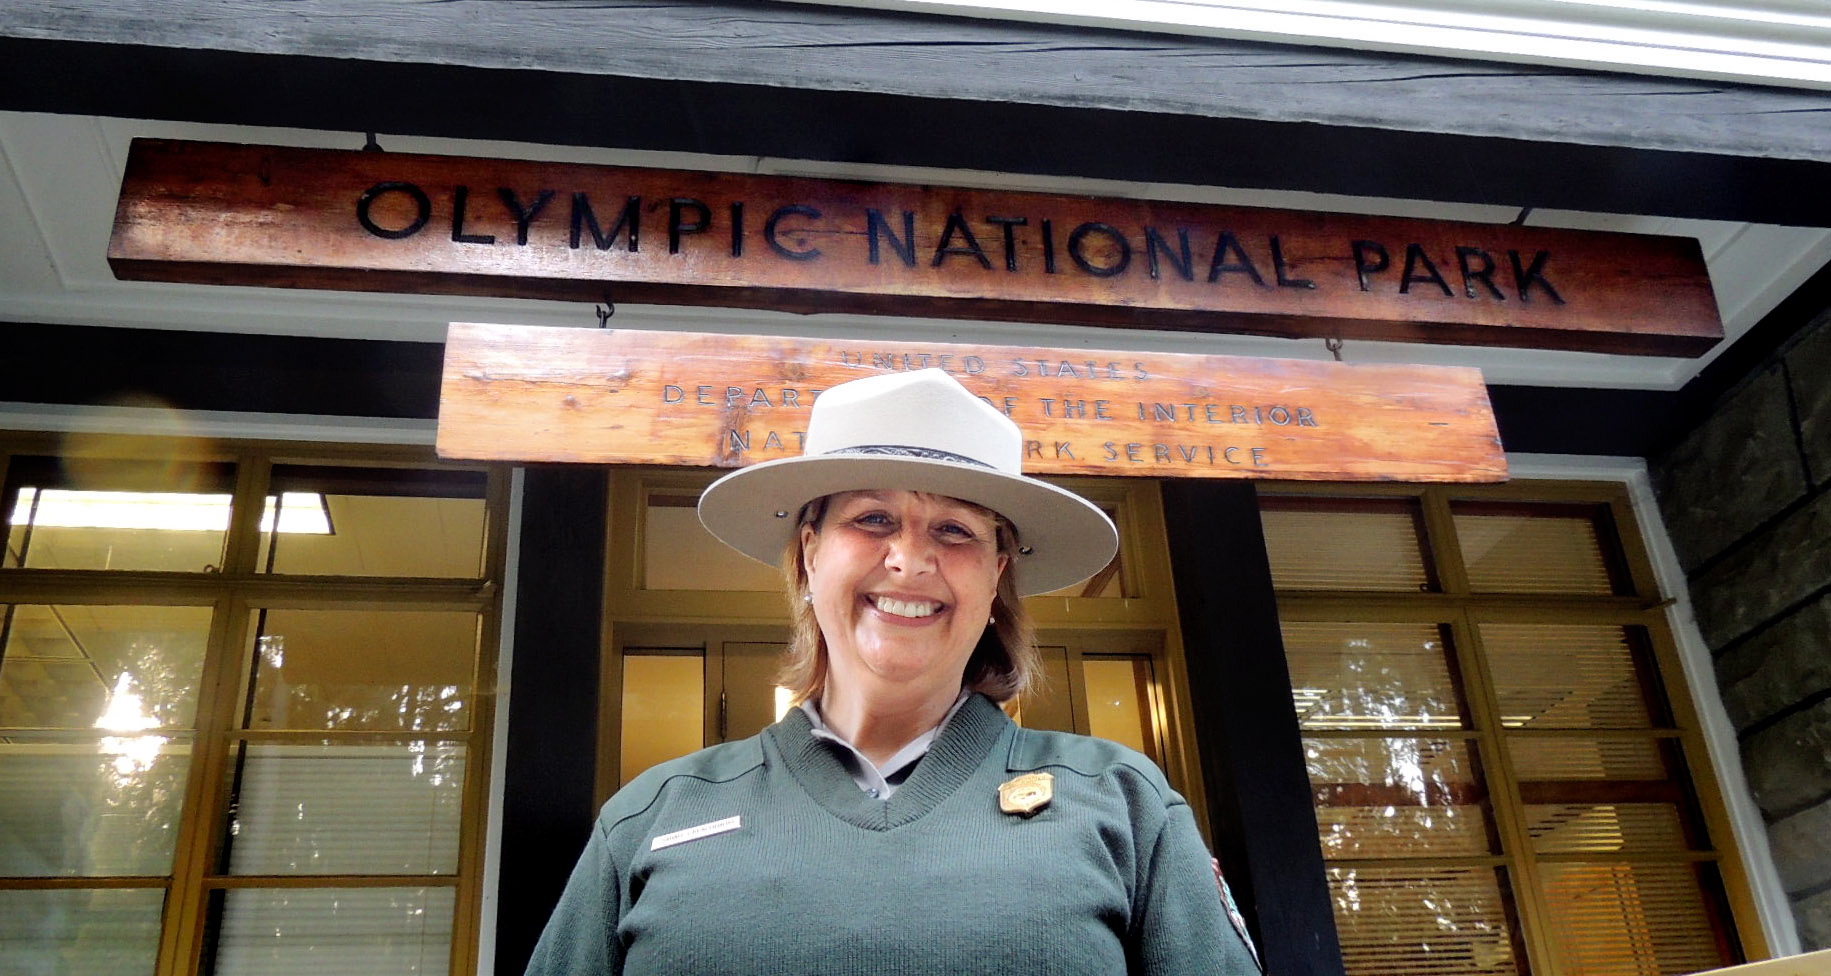 Sarah Creachbaum is the new superintendent at Olympic National Park.